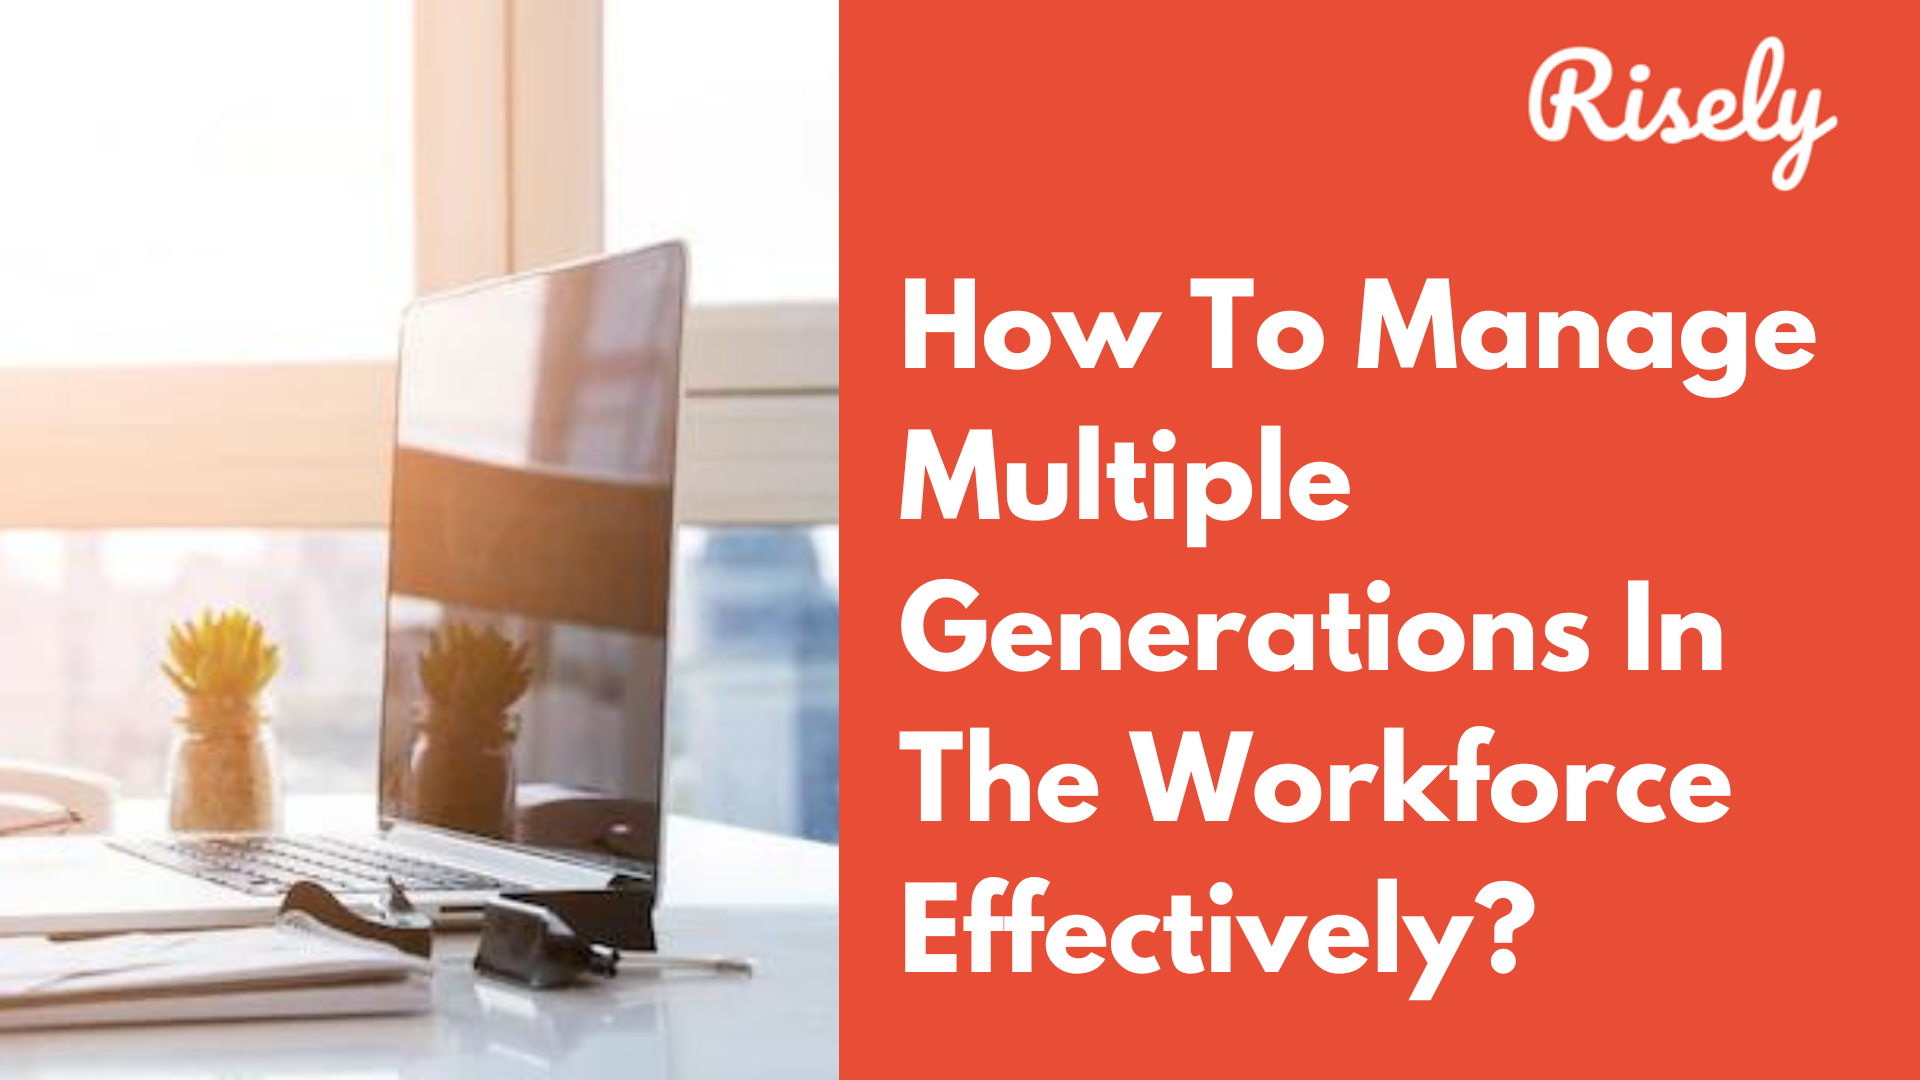 How To Manage Multiple Generations In The Workforce Effectively?